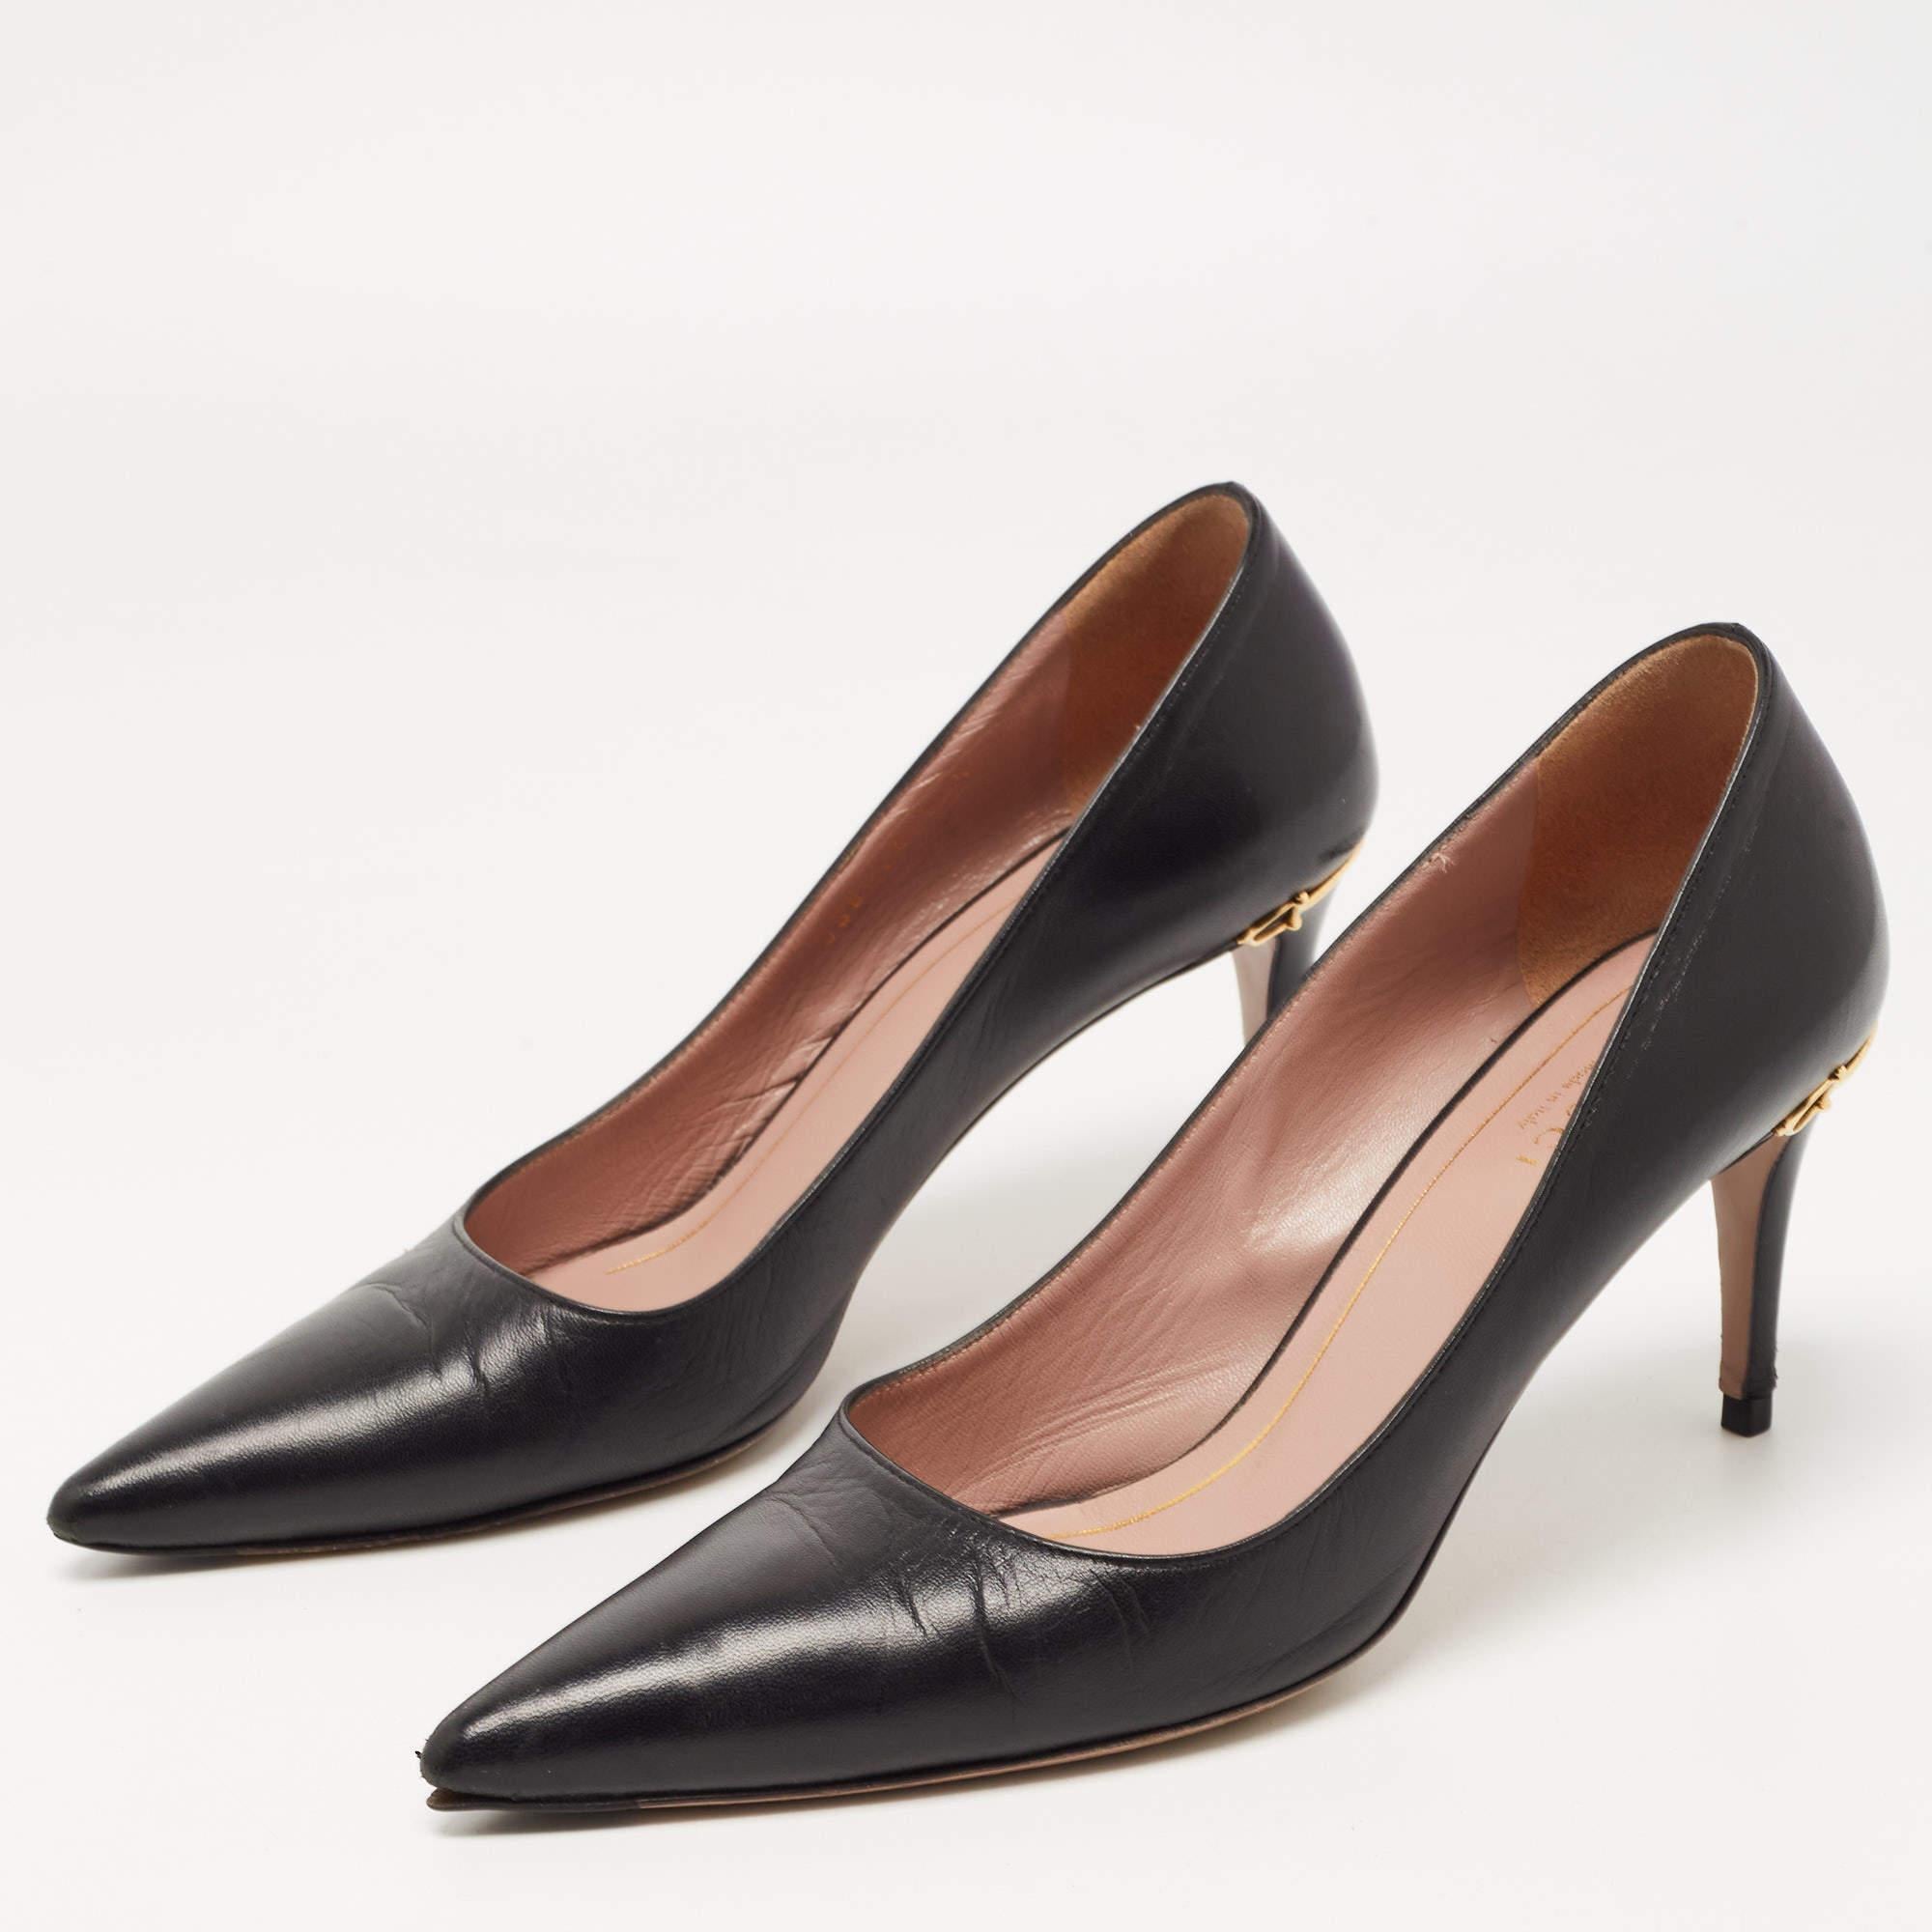 Gucci Black Leather Pointed Toe Pumps Size 36.5 For Sale 4